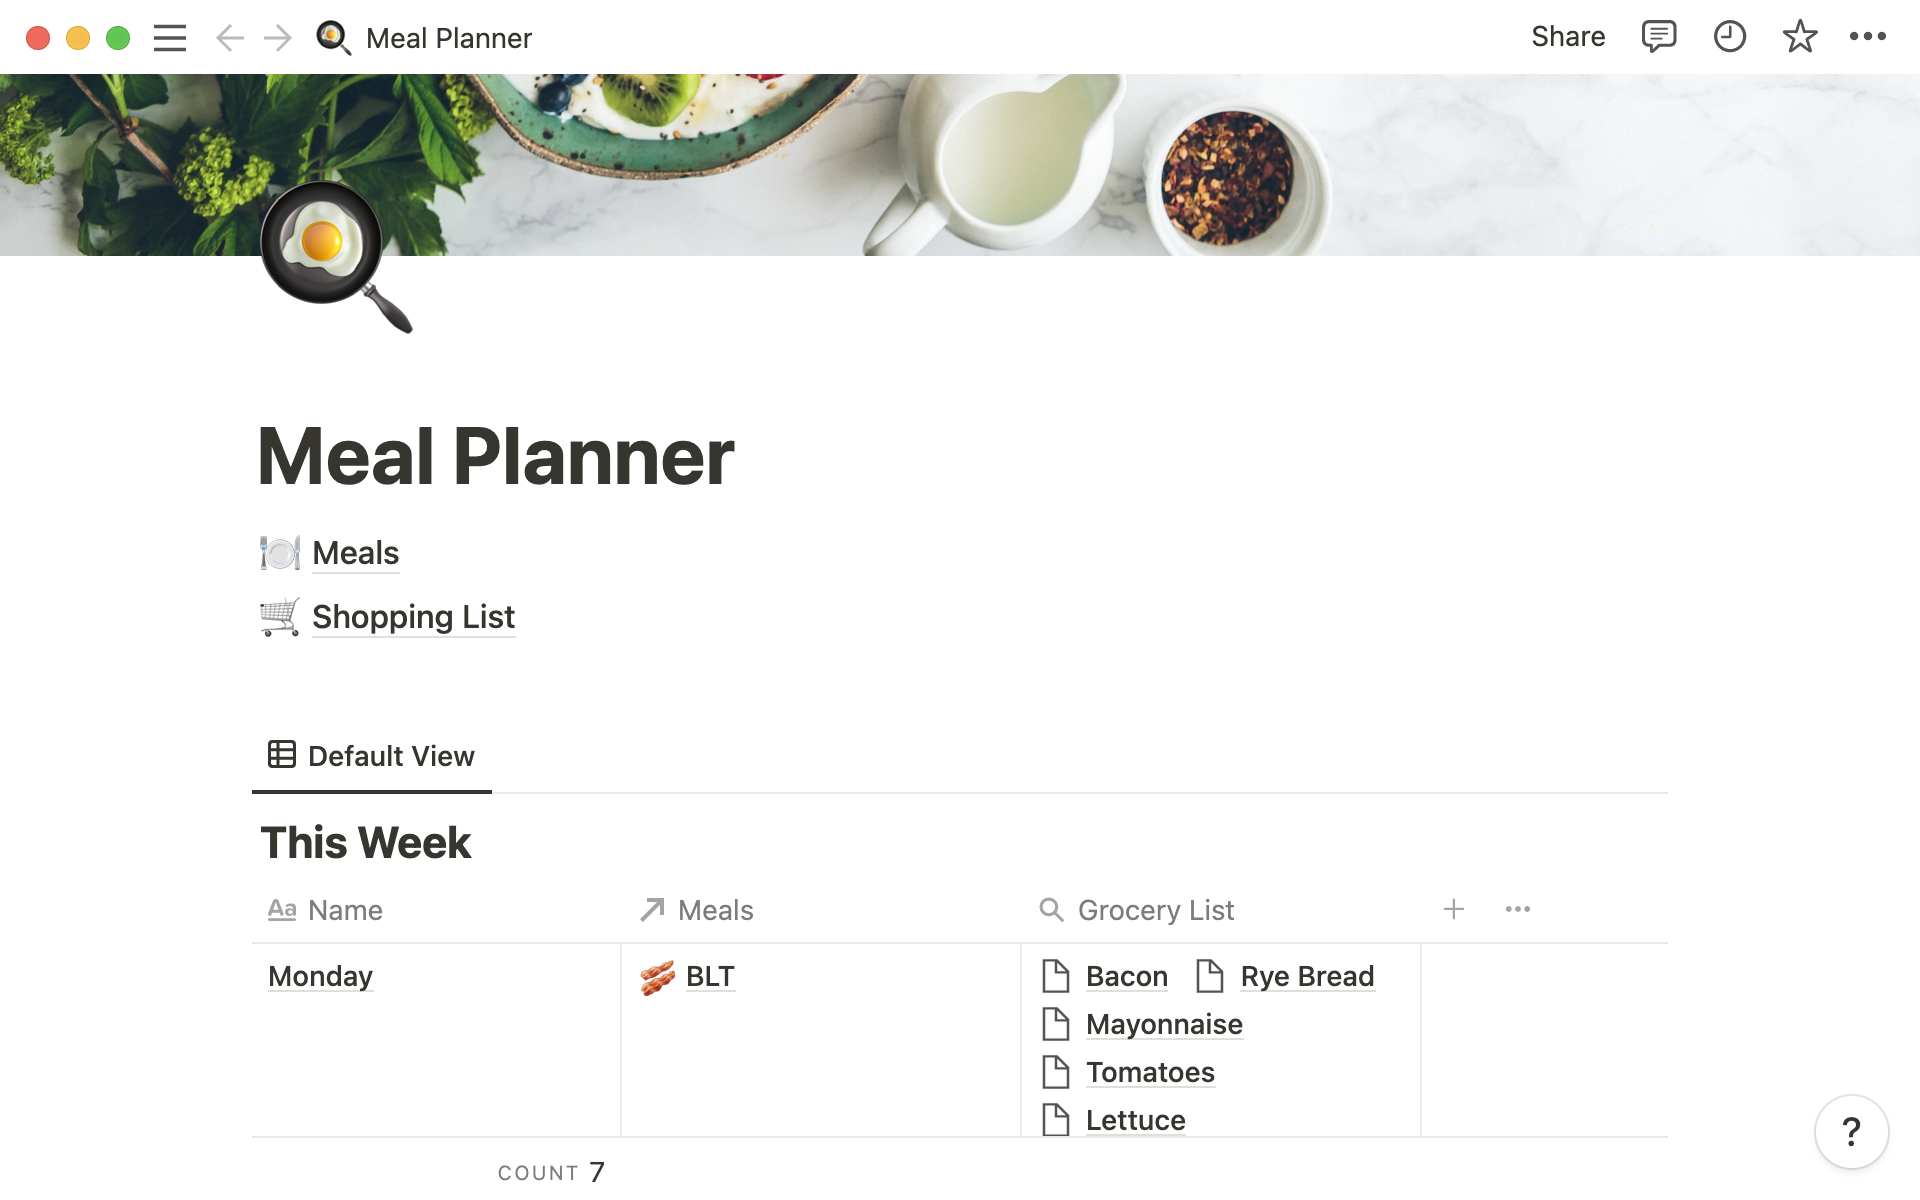 Capture recipes and ideas for meals, schedule them on a weekly basis, and generate a grocery list.